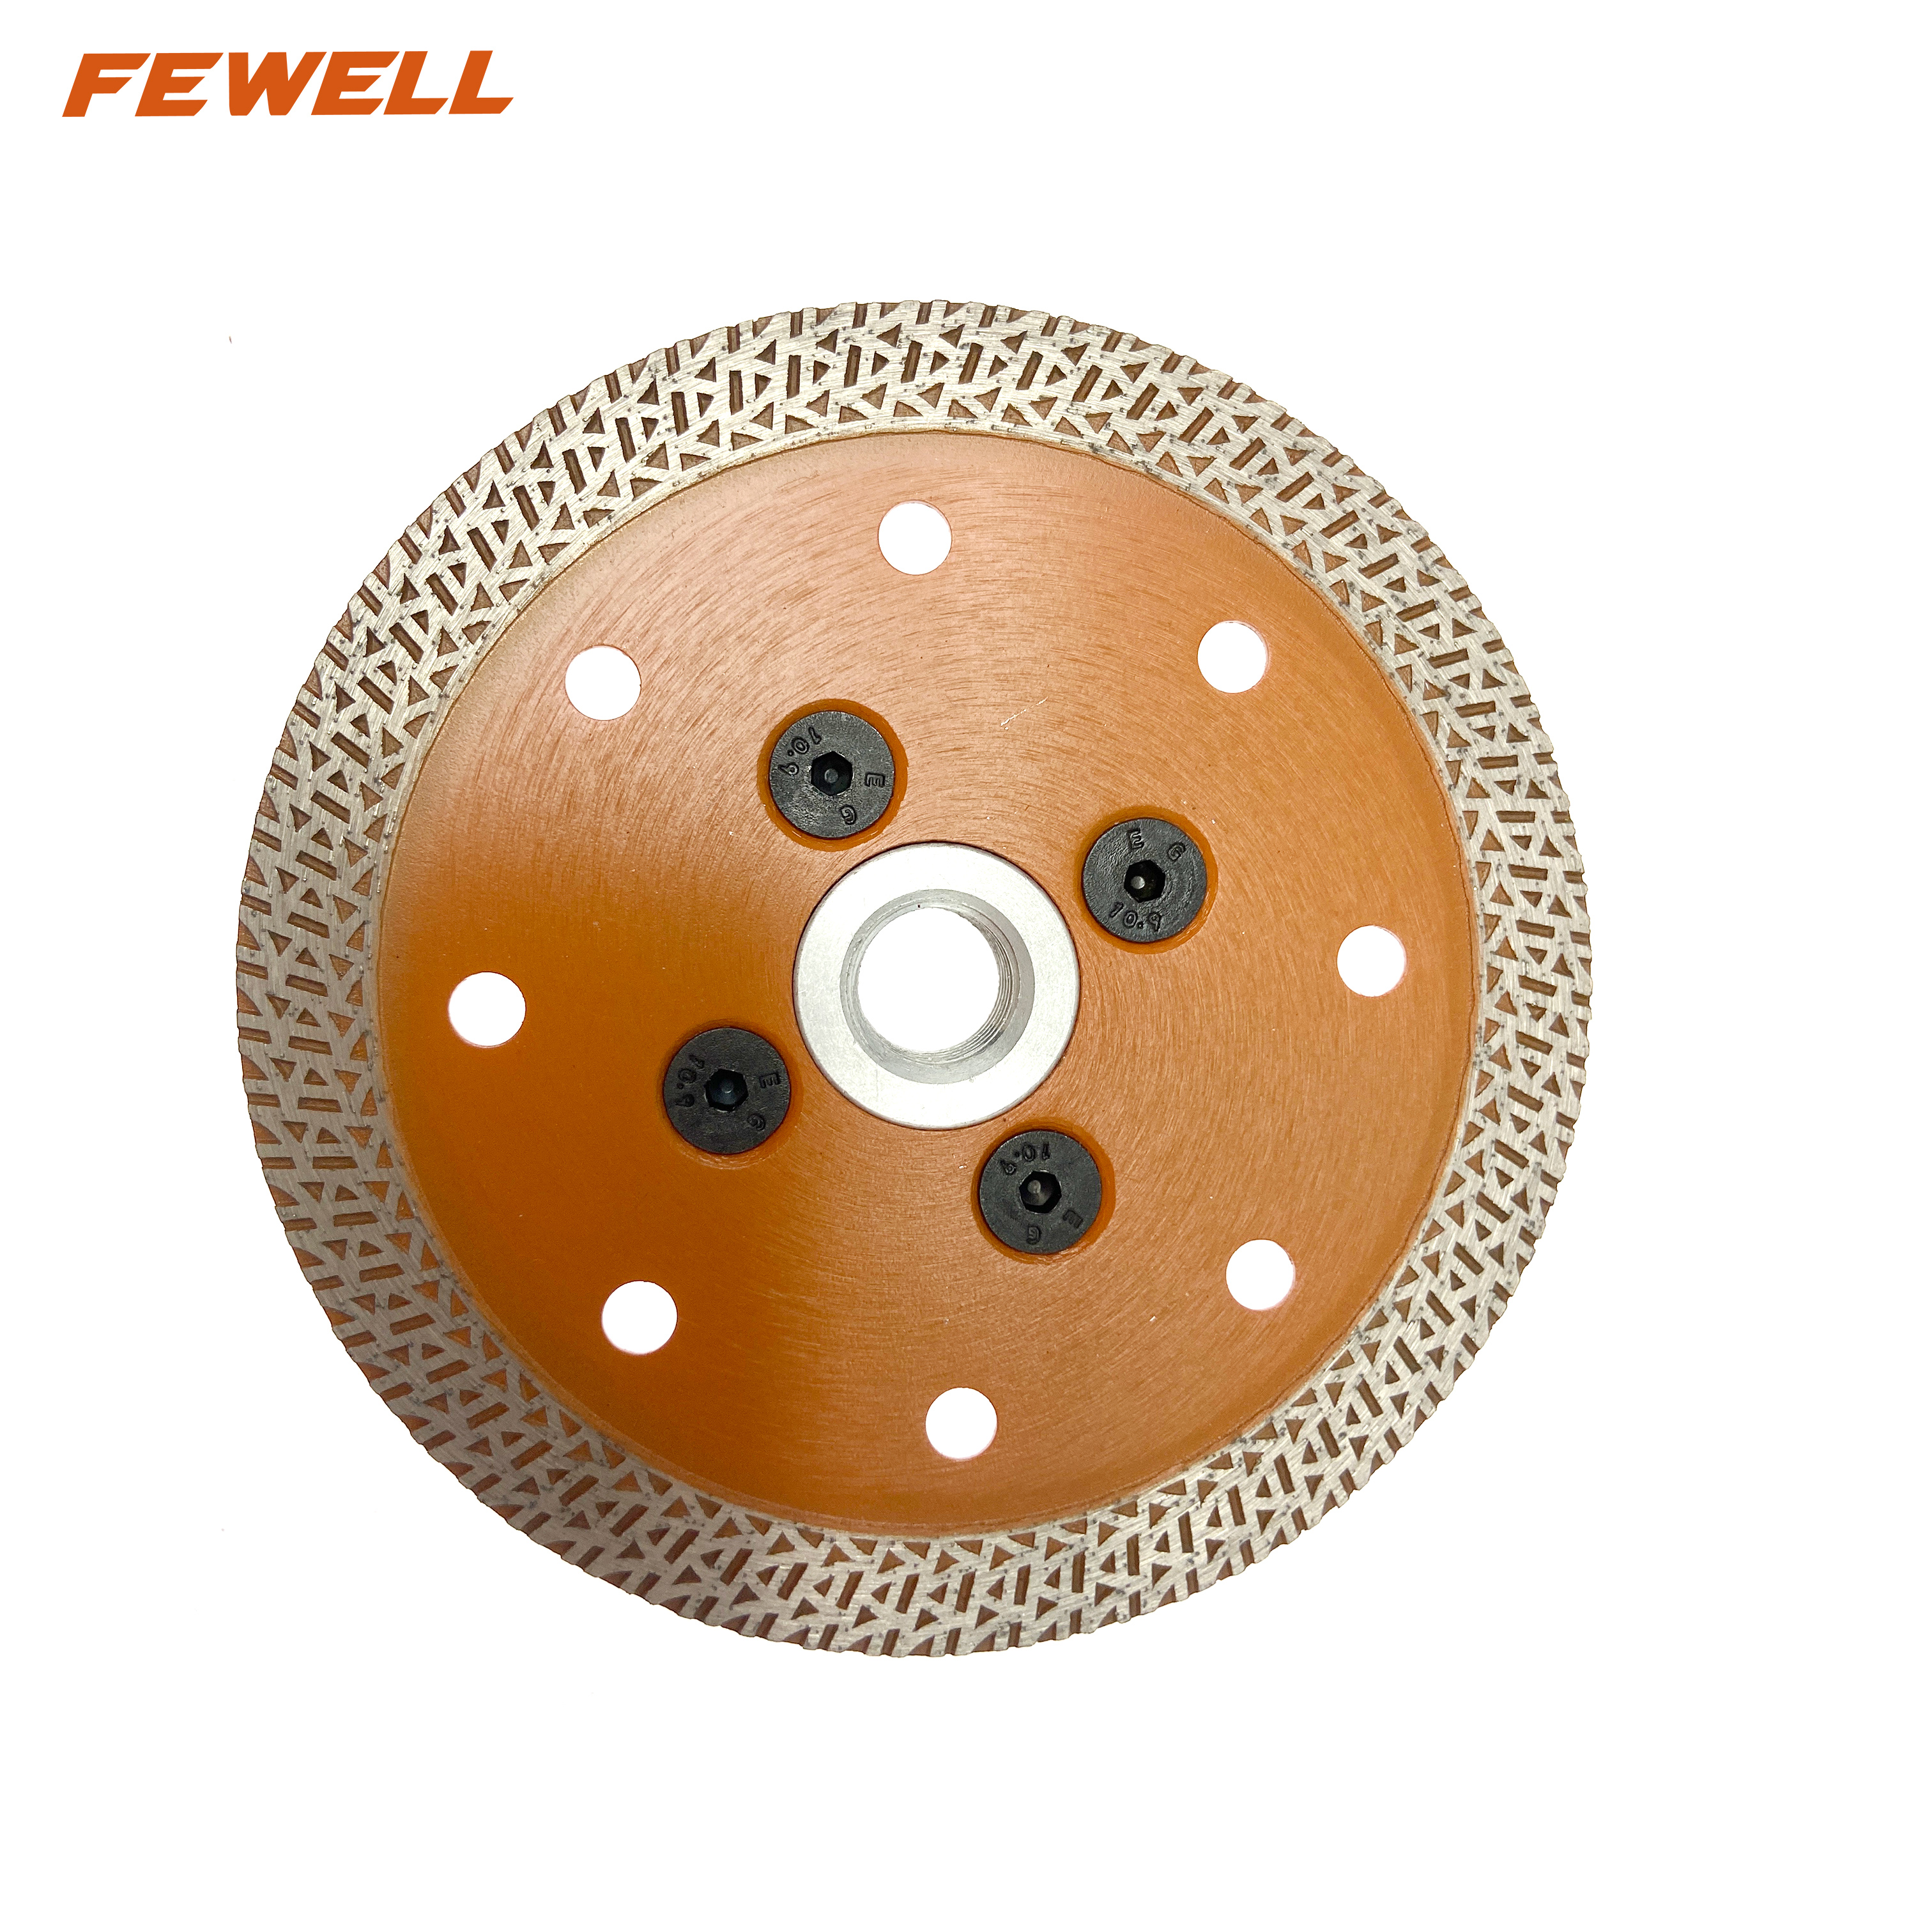 High quality hot press 4、4.5、5inch 105-125*10mm height special teeth Aluminum flange diamond saw blade for cutting ceramic tile porcelain